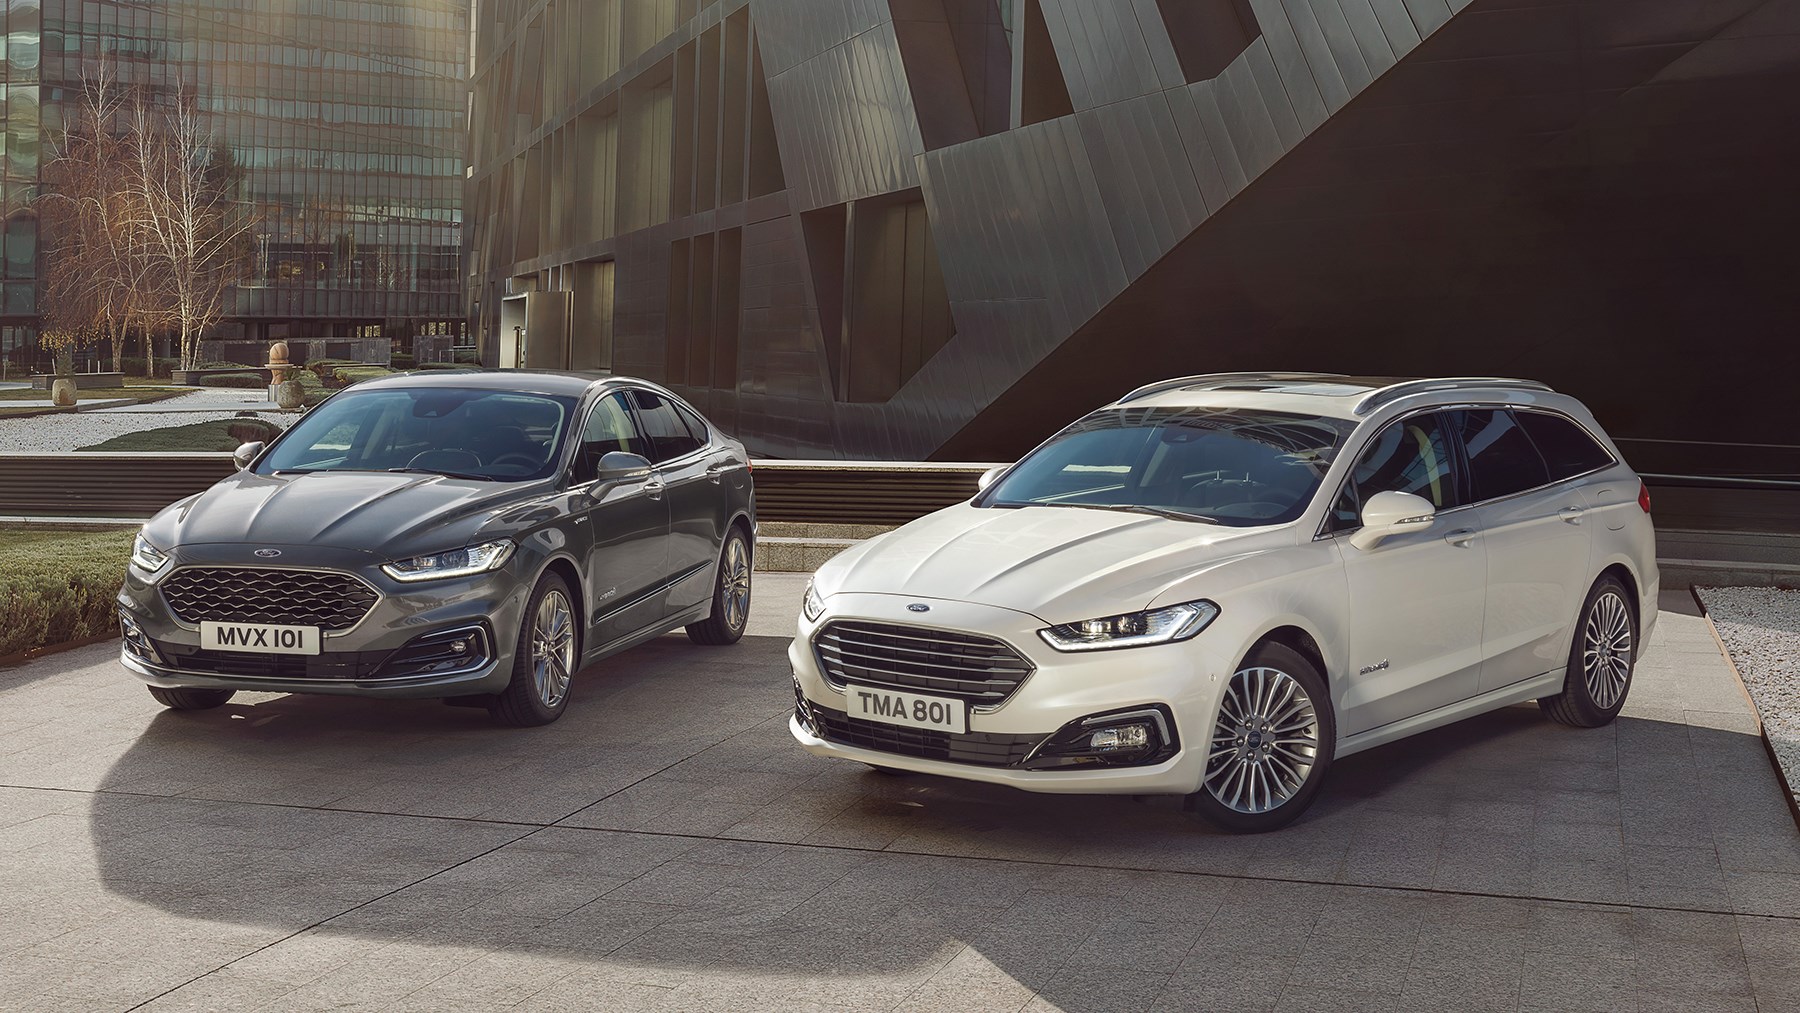 Ford's Mondeo dies in 2022 - successor could be hybrid SUV for US